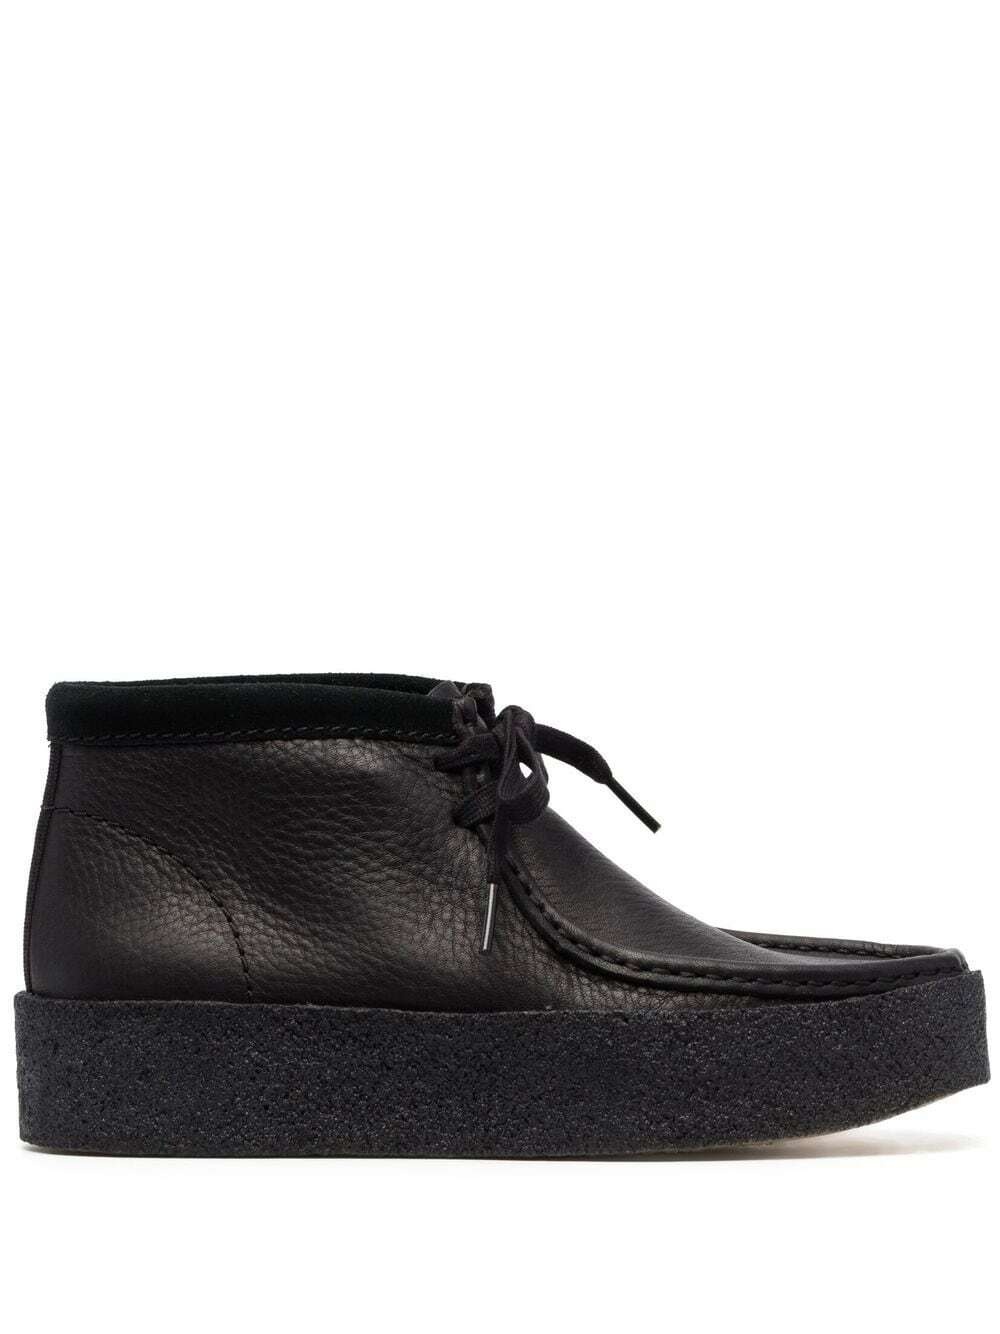 CLARKS - Wallabee Cup Bt Leather Shoes